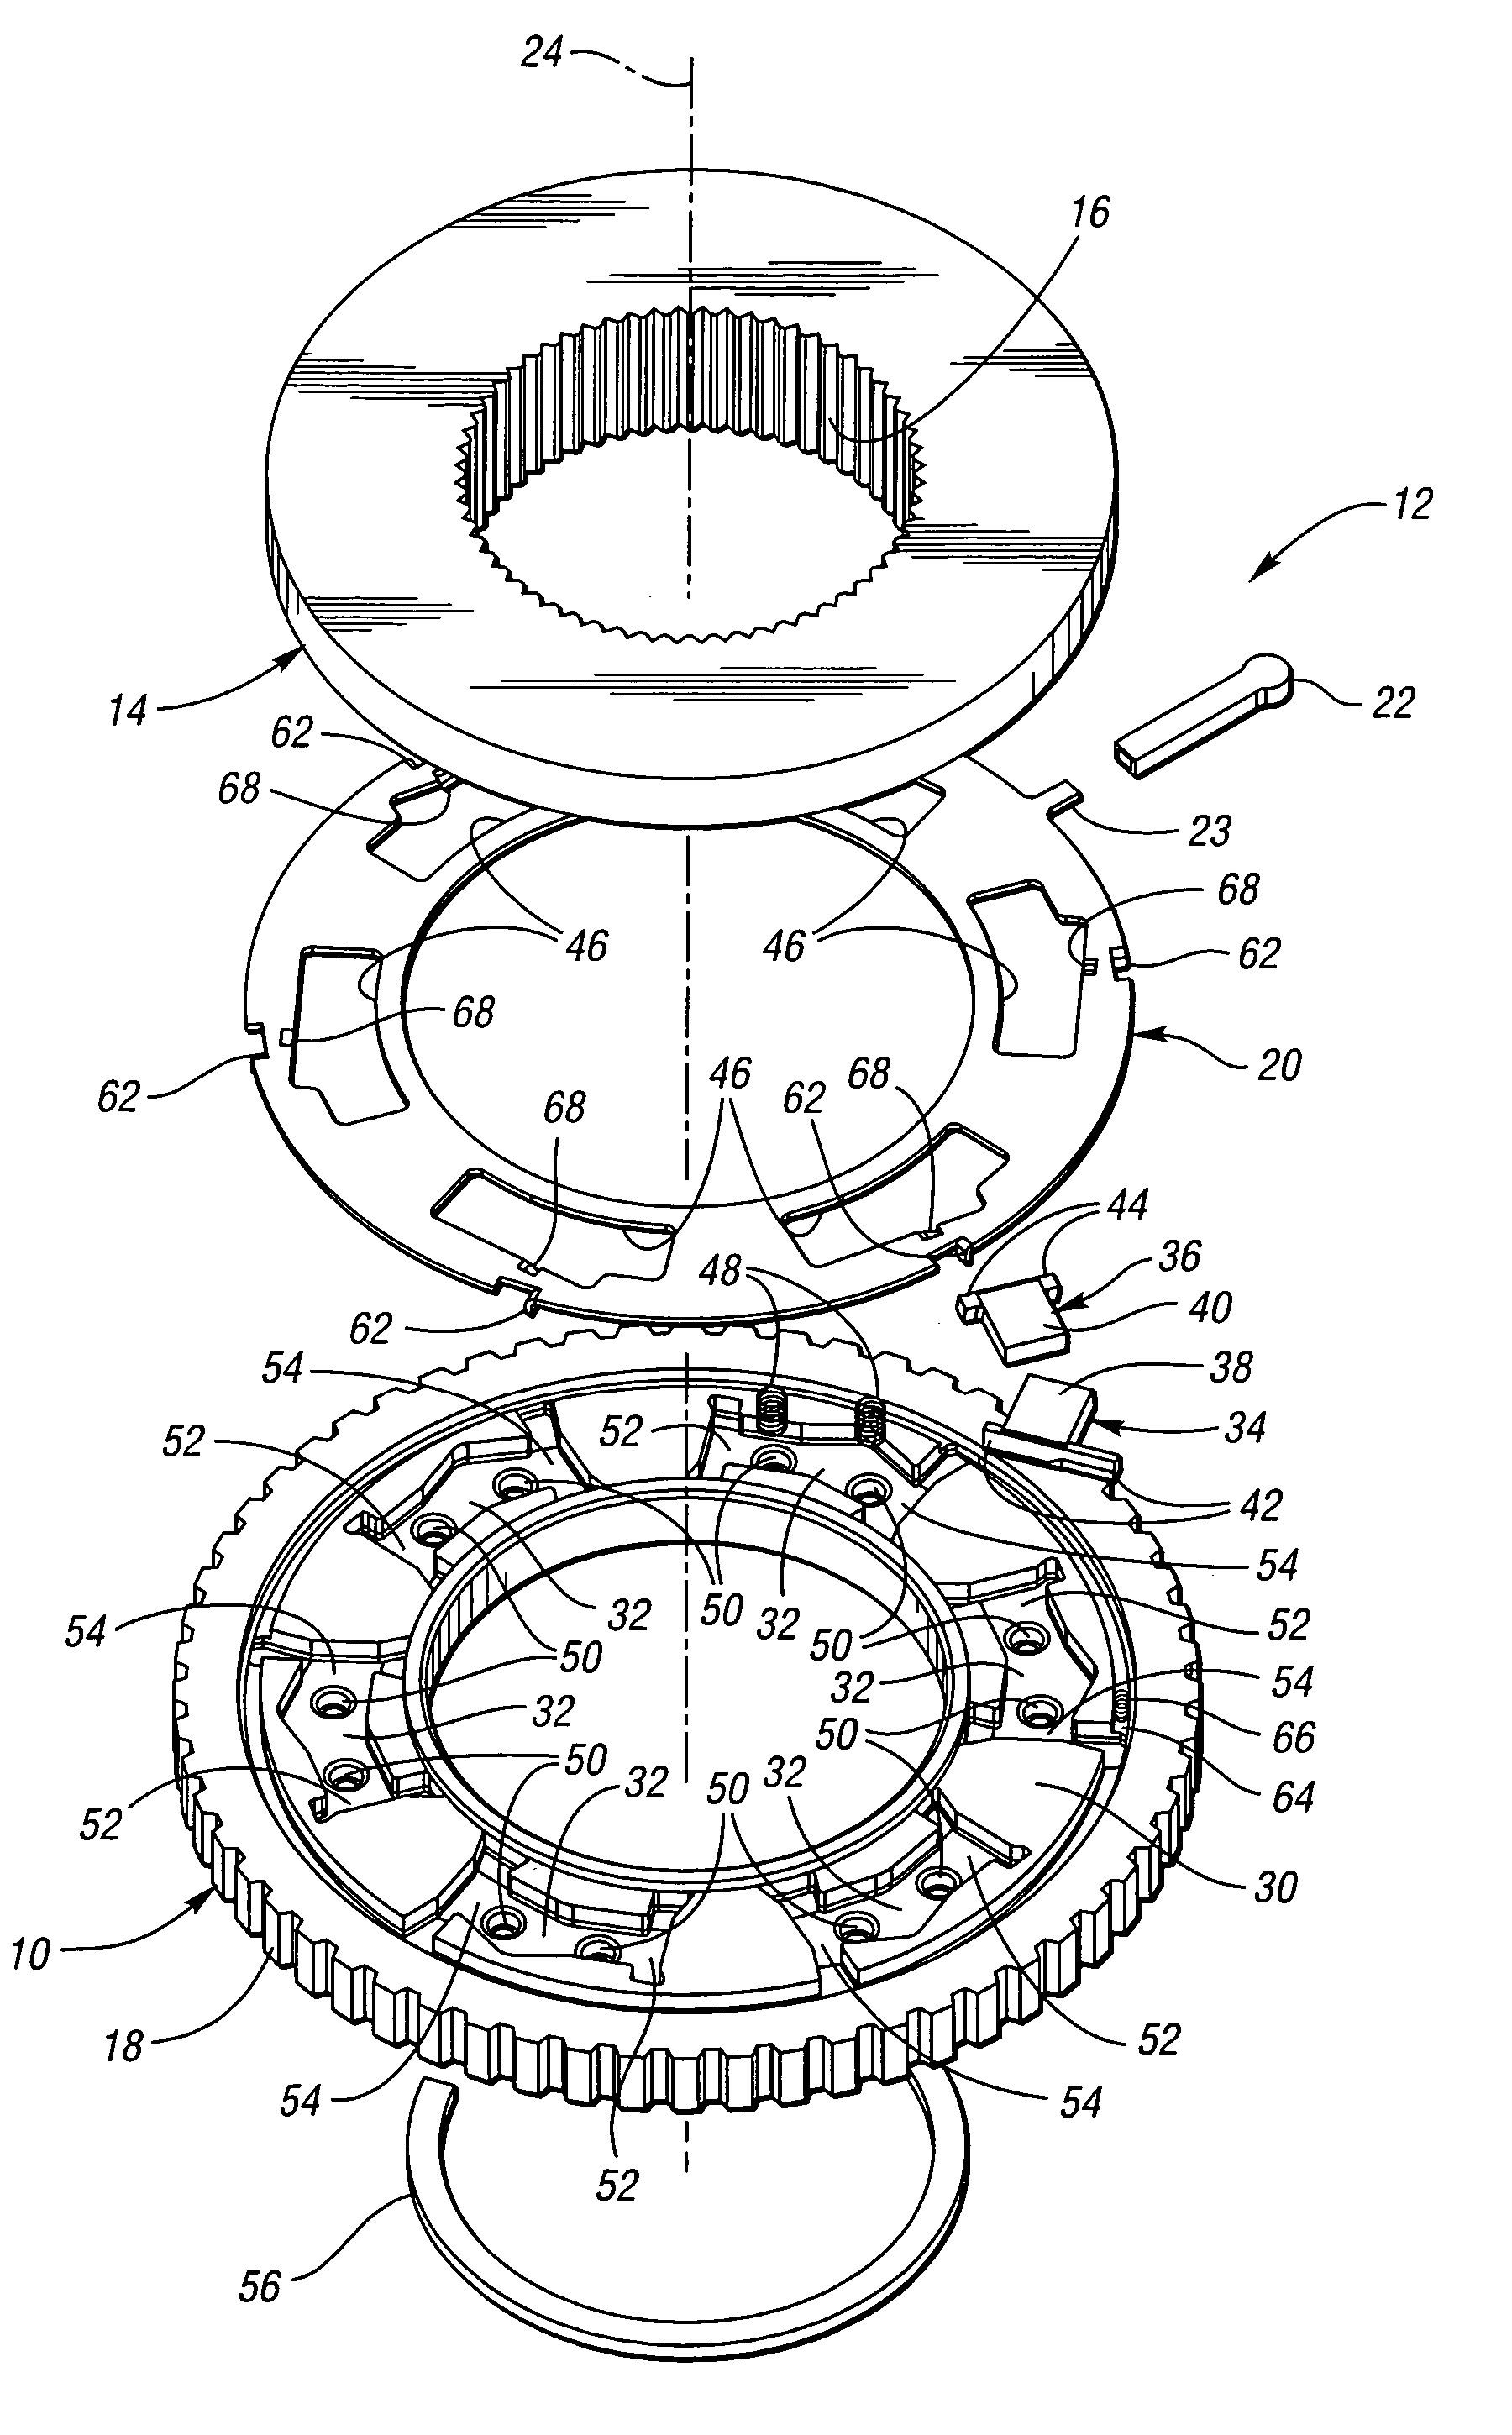 Overrunning coupling assembly and method for controlling the engagement of planar members